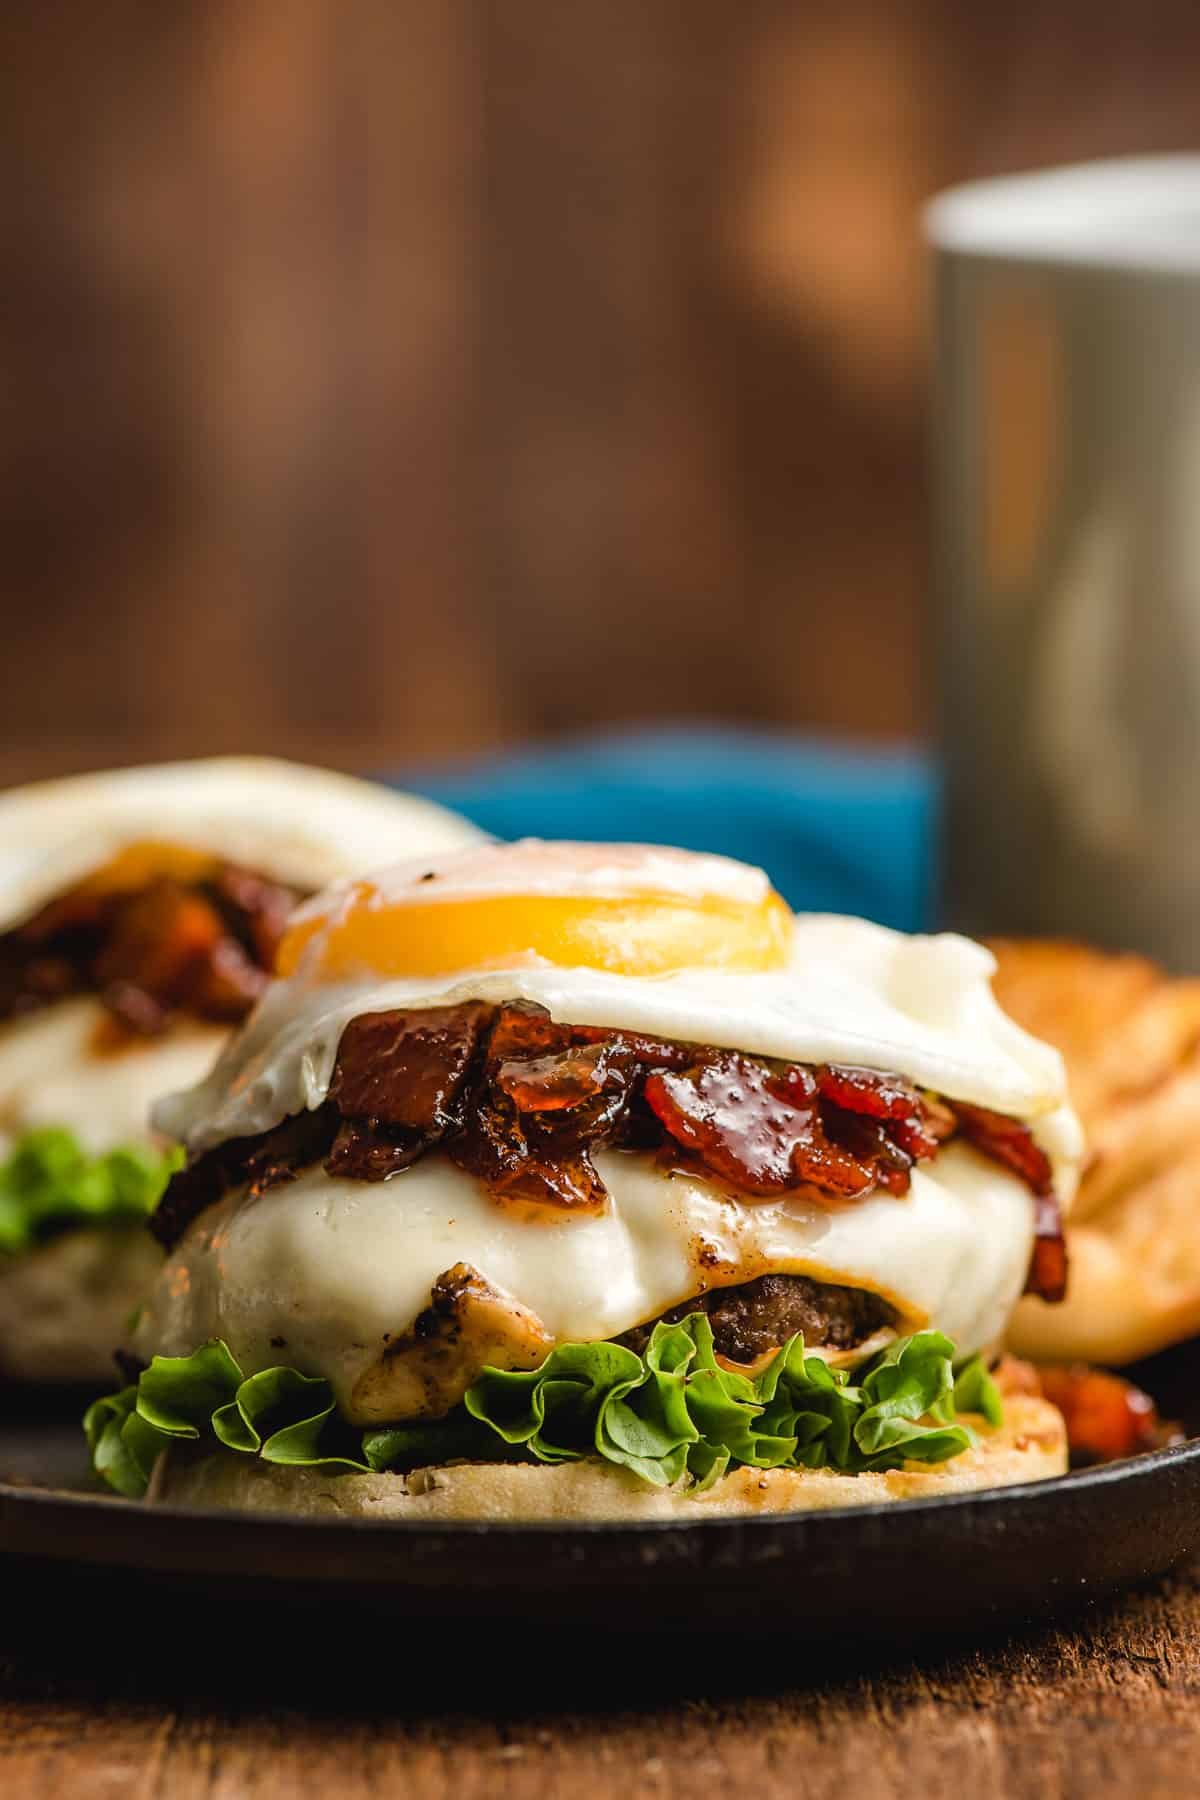 English muffin topped with lettuce, cheeseburger, salary jam, and a fried egg.